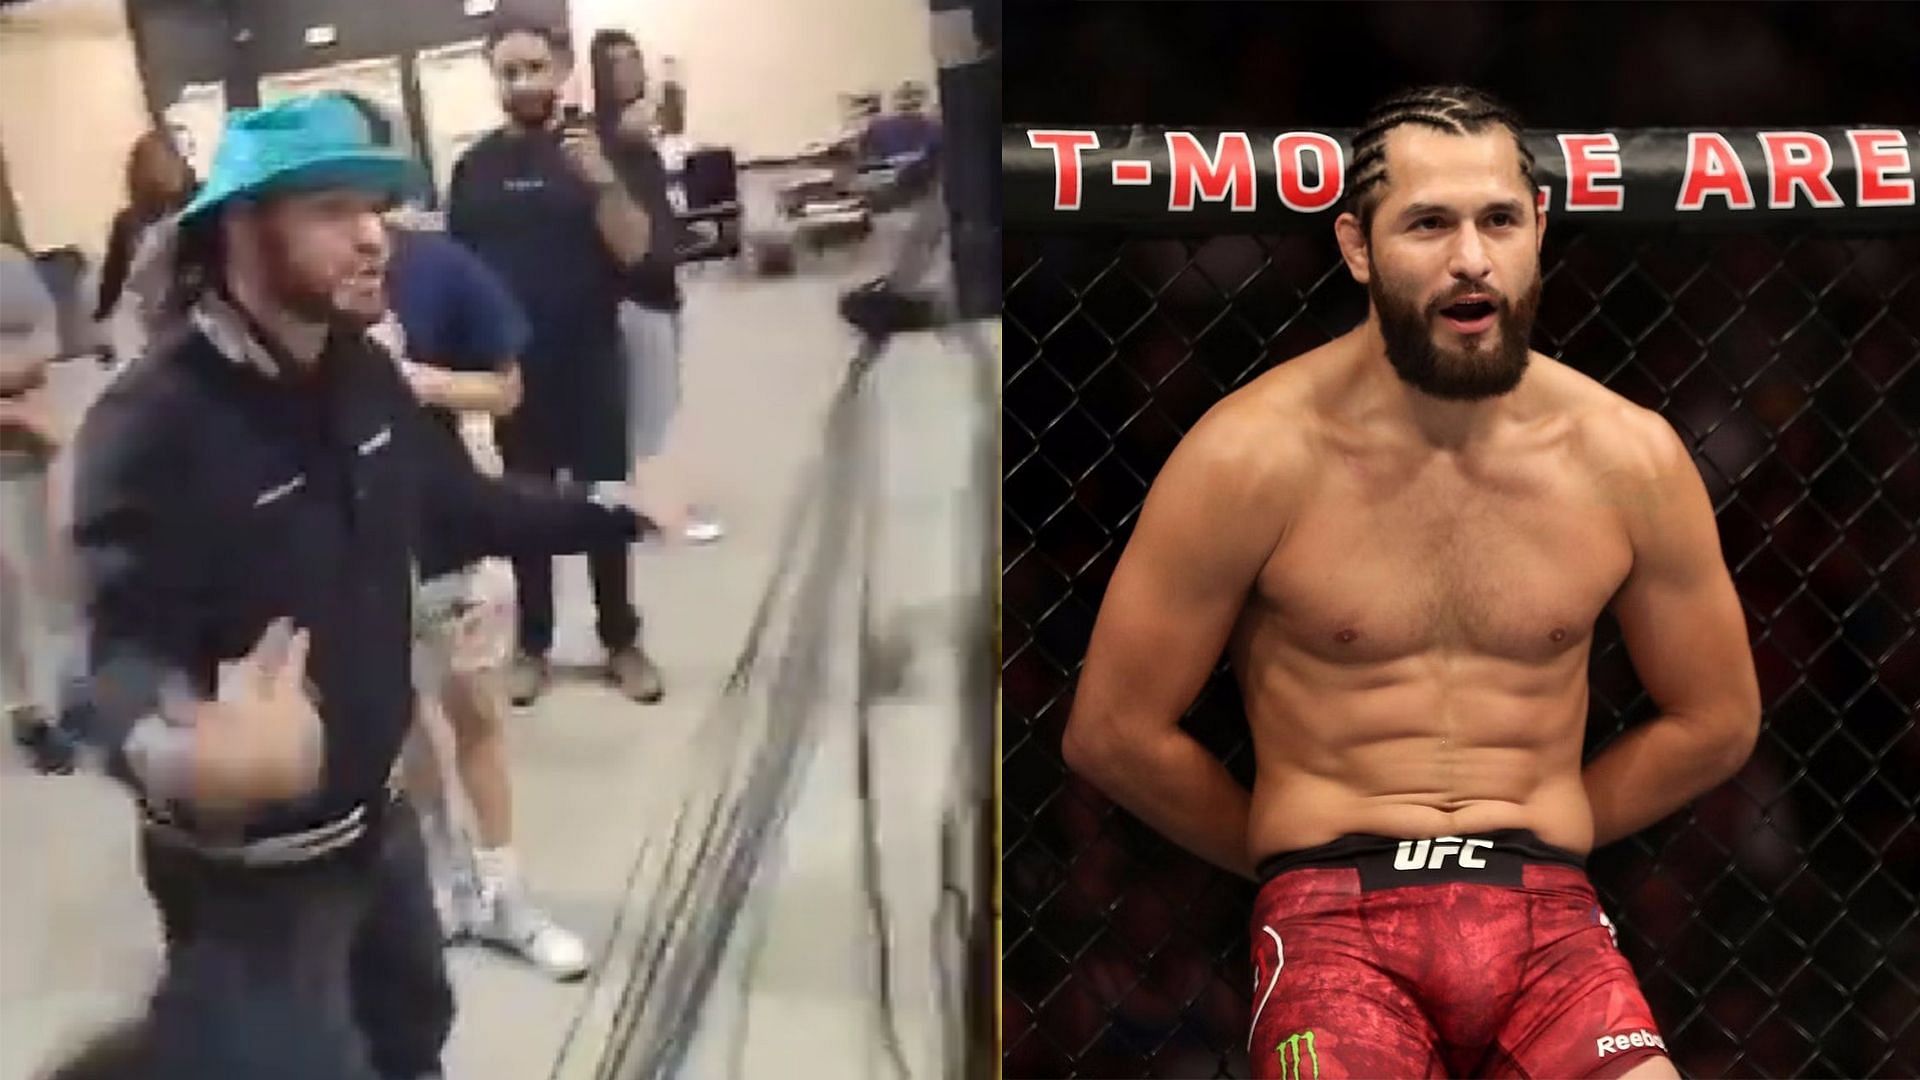 Jorge Masvidal prevents a fight from breaking out [Photo credit: @UFCFightPass on Twitter]